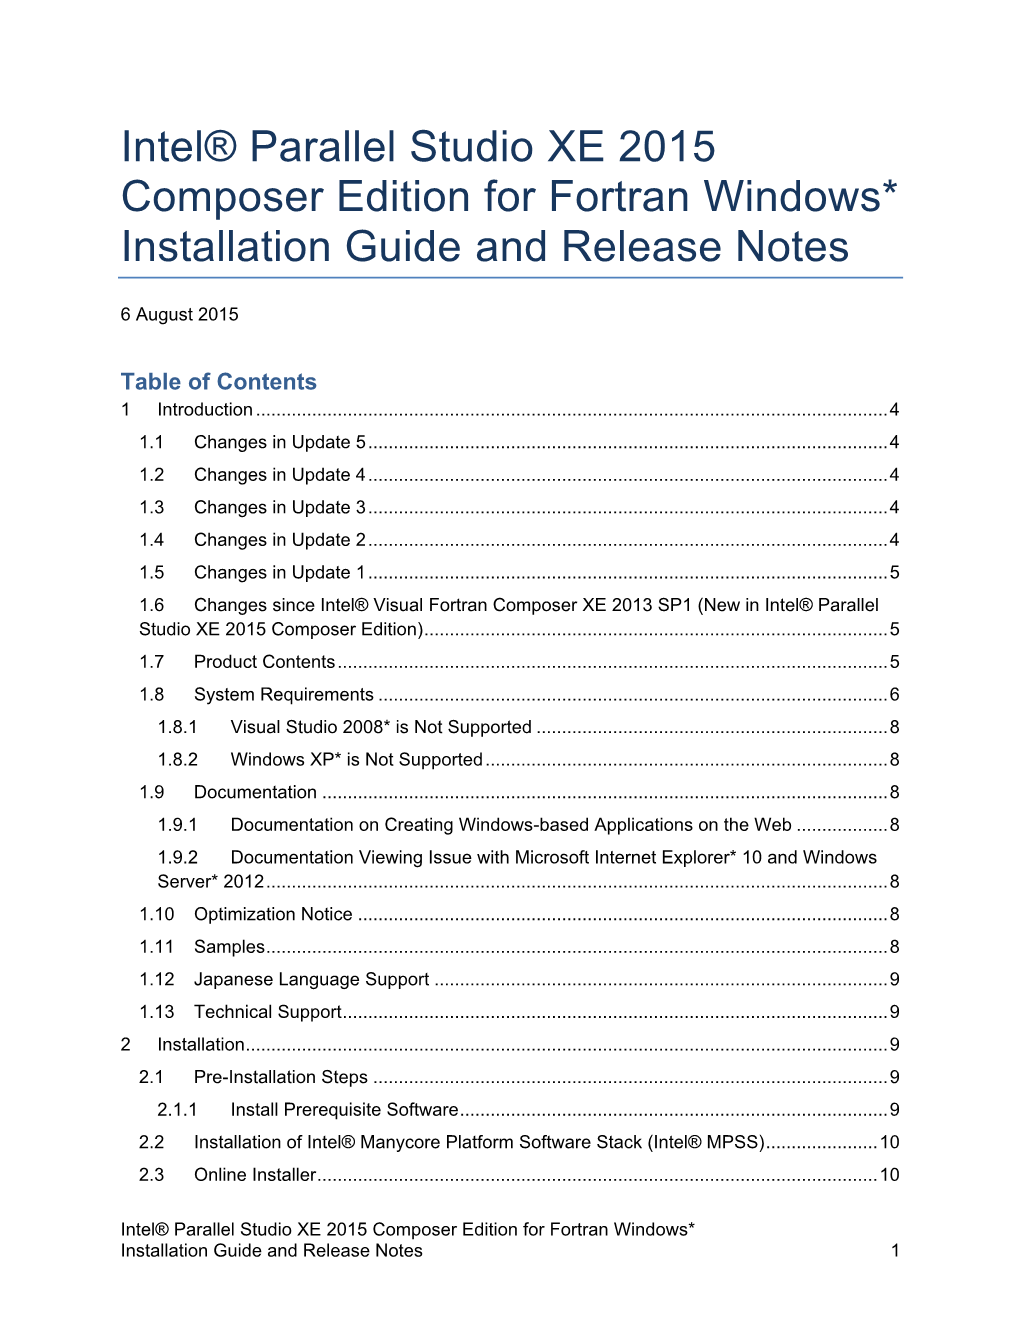 Intel® Parallel Studio XE 2015 Composer Edition for Fortran Windows* Installation Guide and Release Notes